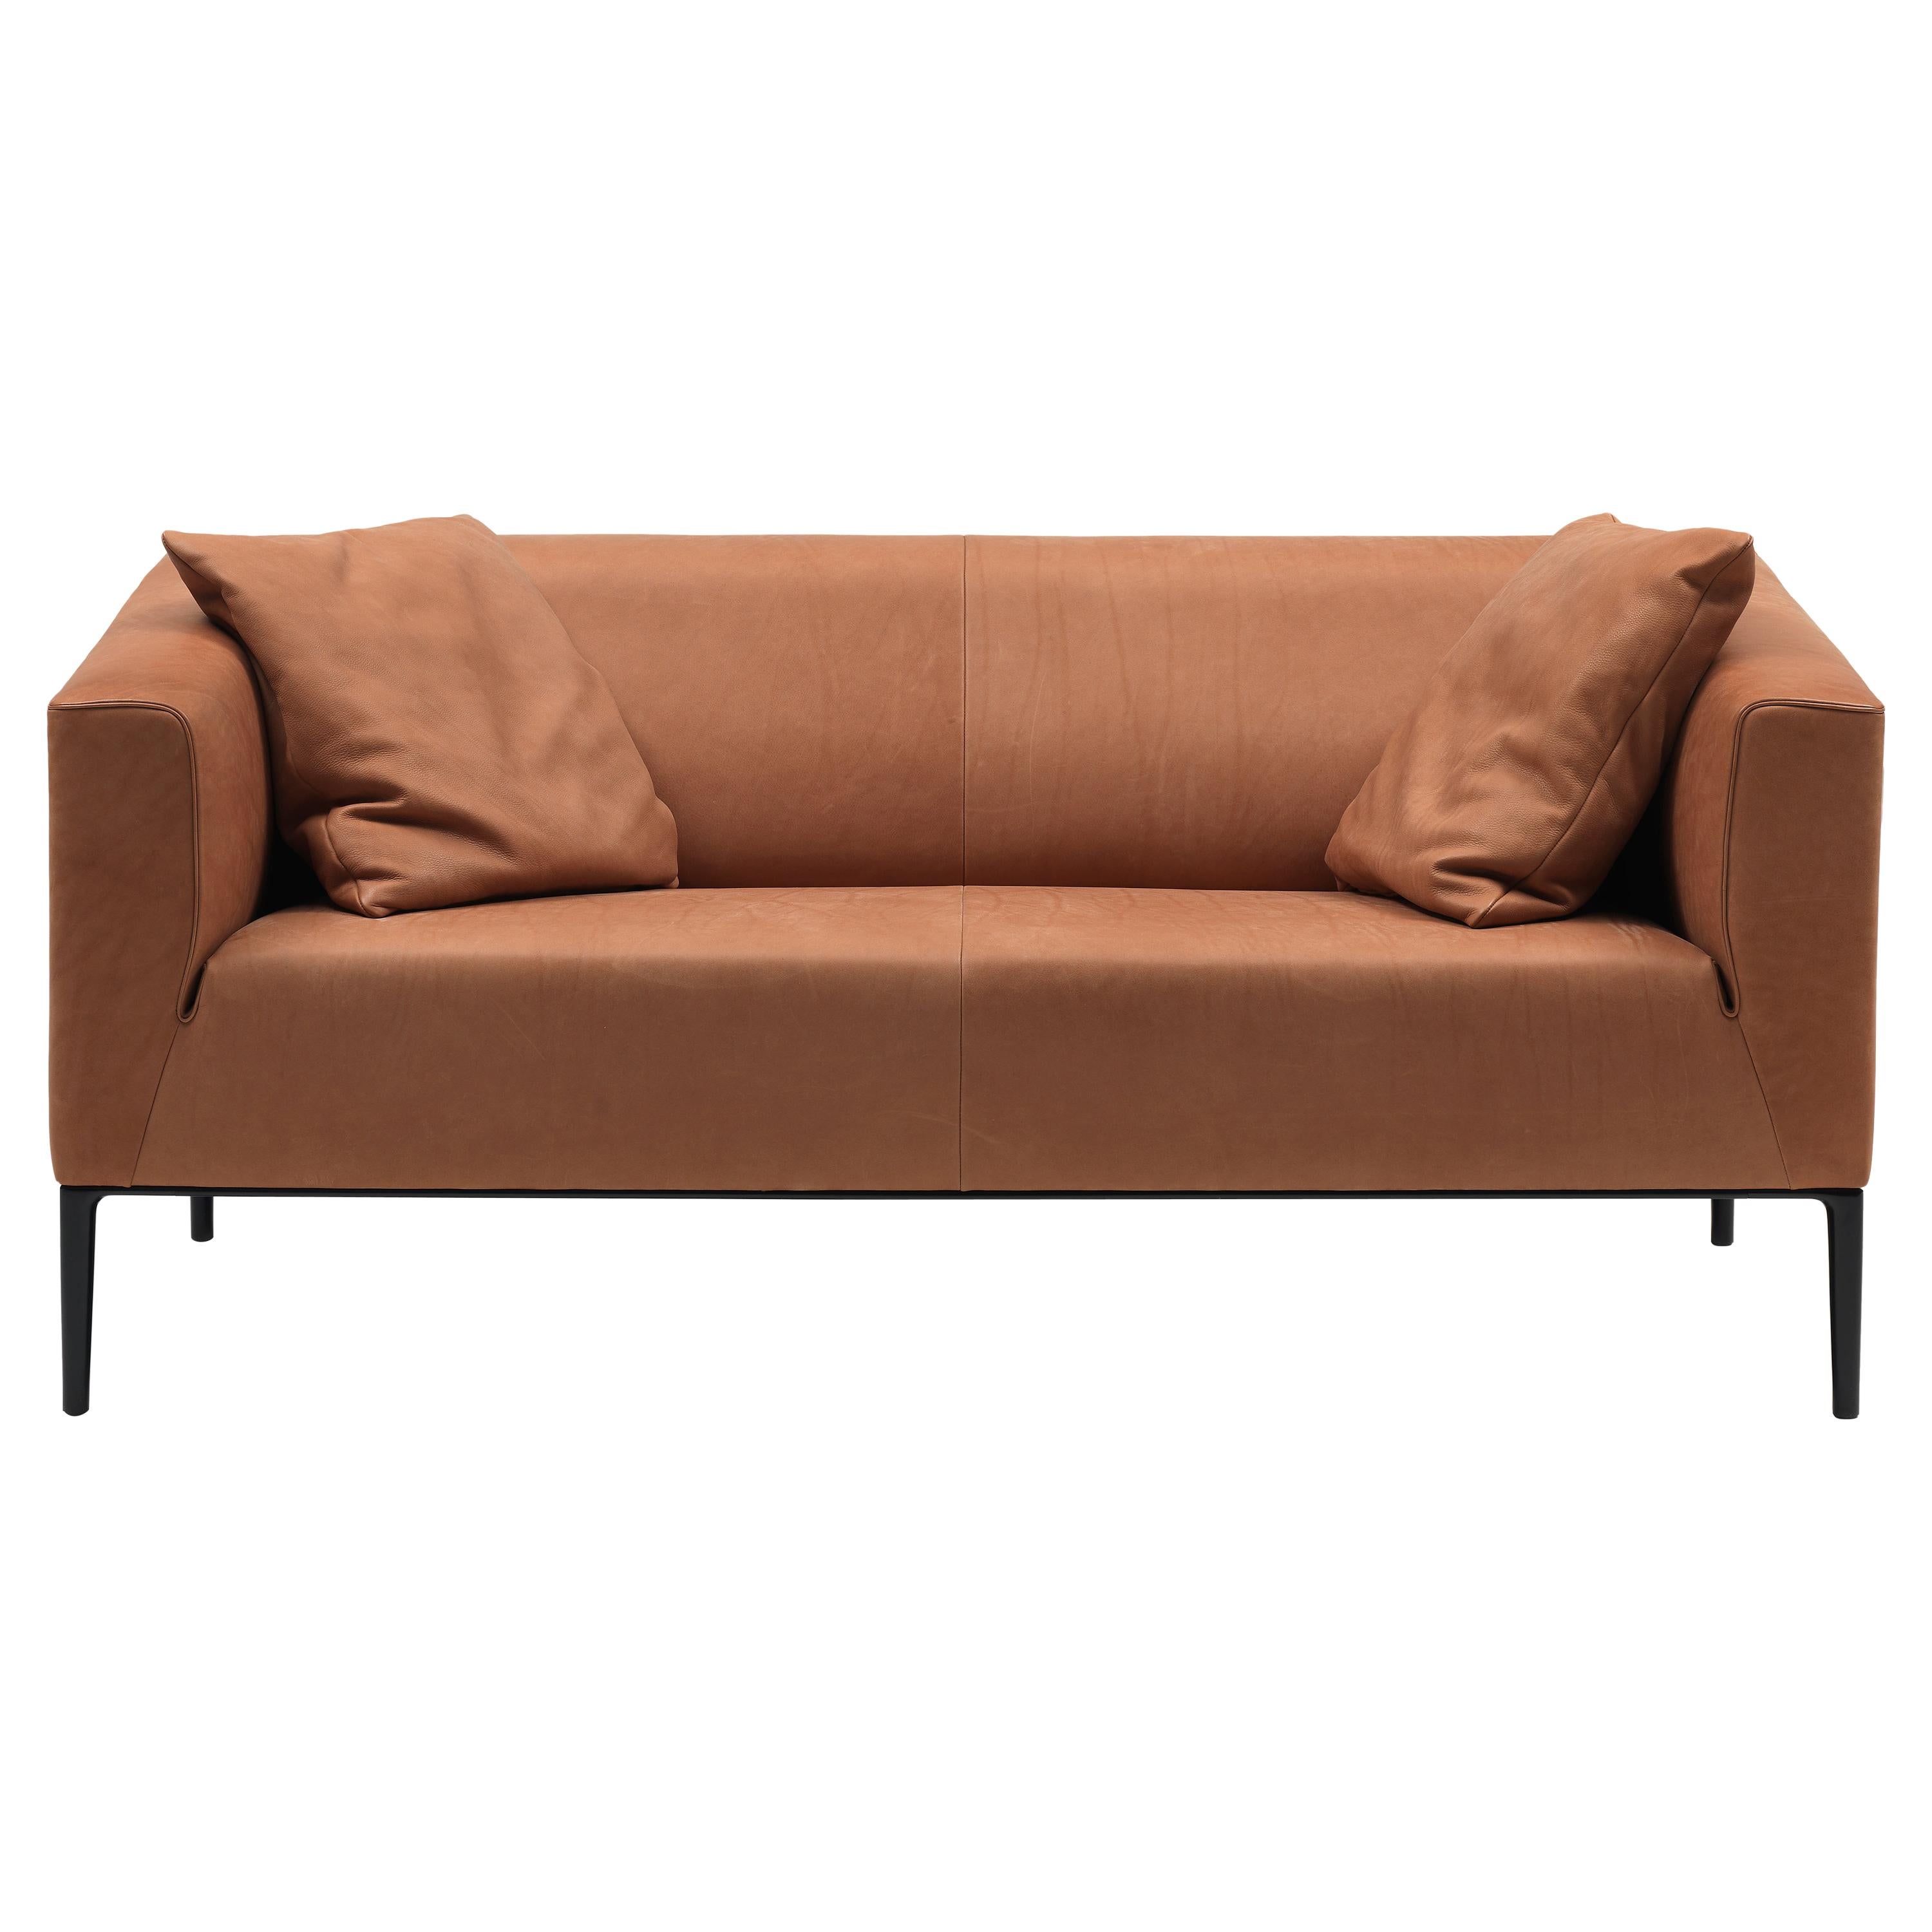 Set of DS-161 Sofa and 2 Cushions by De Sede